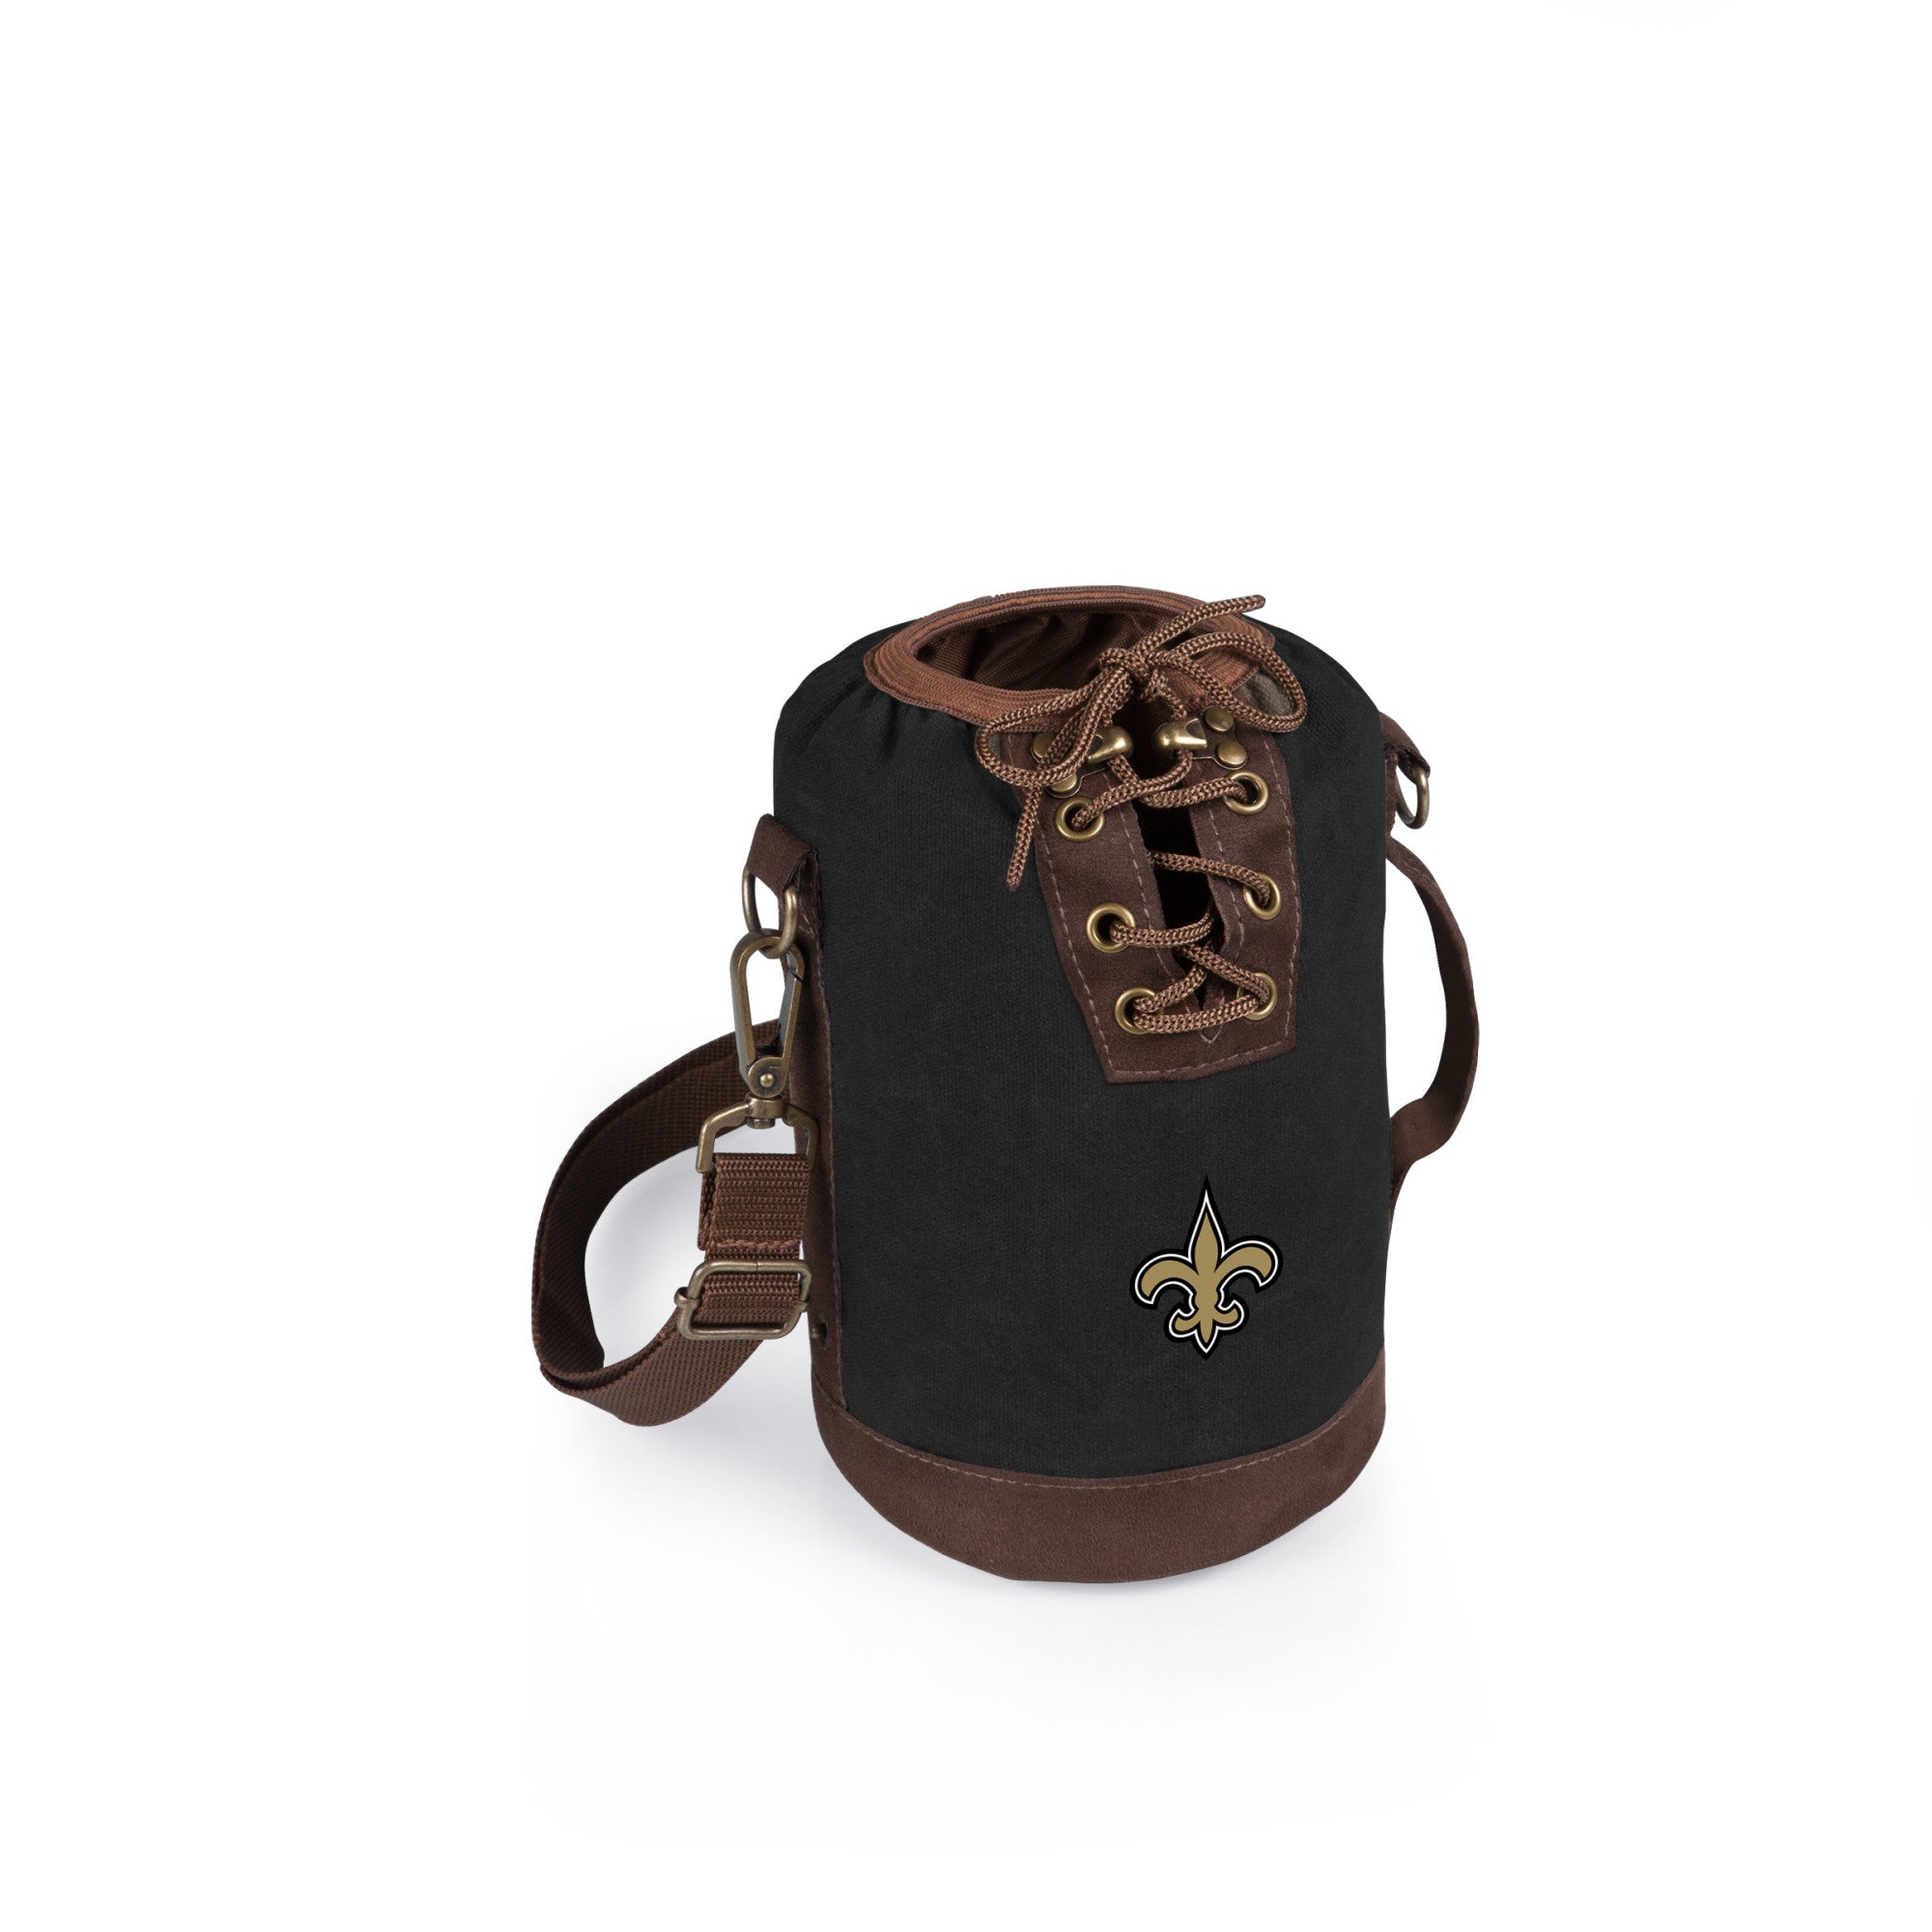 New Orleans Saints - Insulated Growler Tote with 64 oz. Glass Growler, (Black with Brown Accents & Glass Growler)